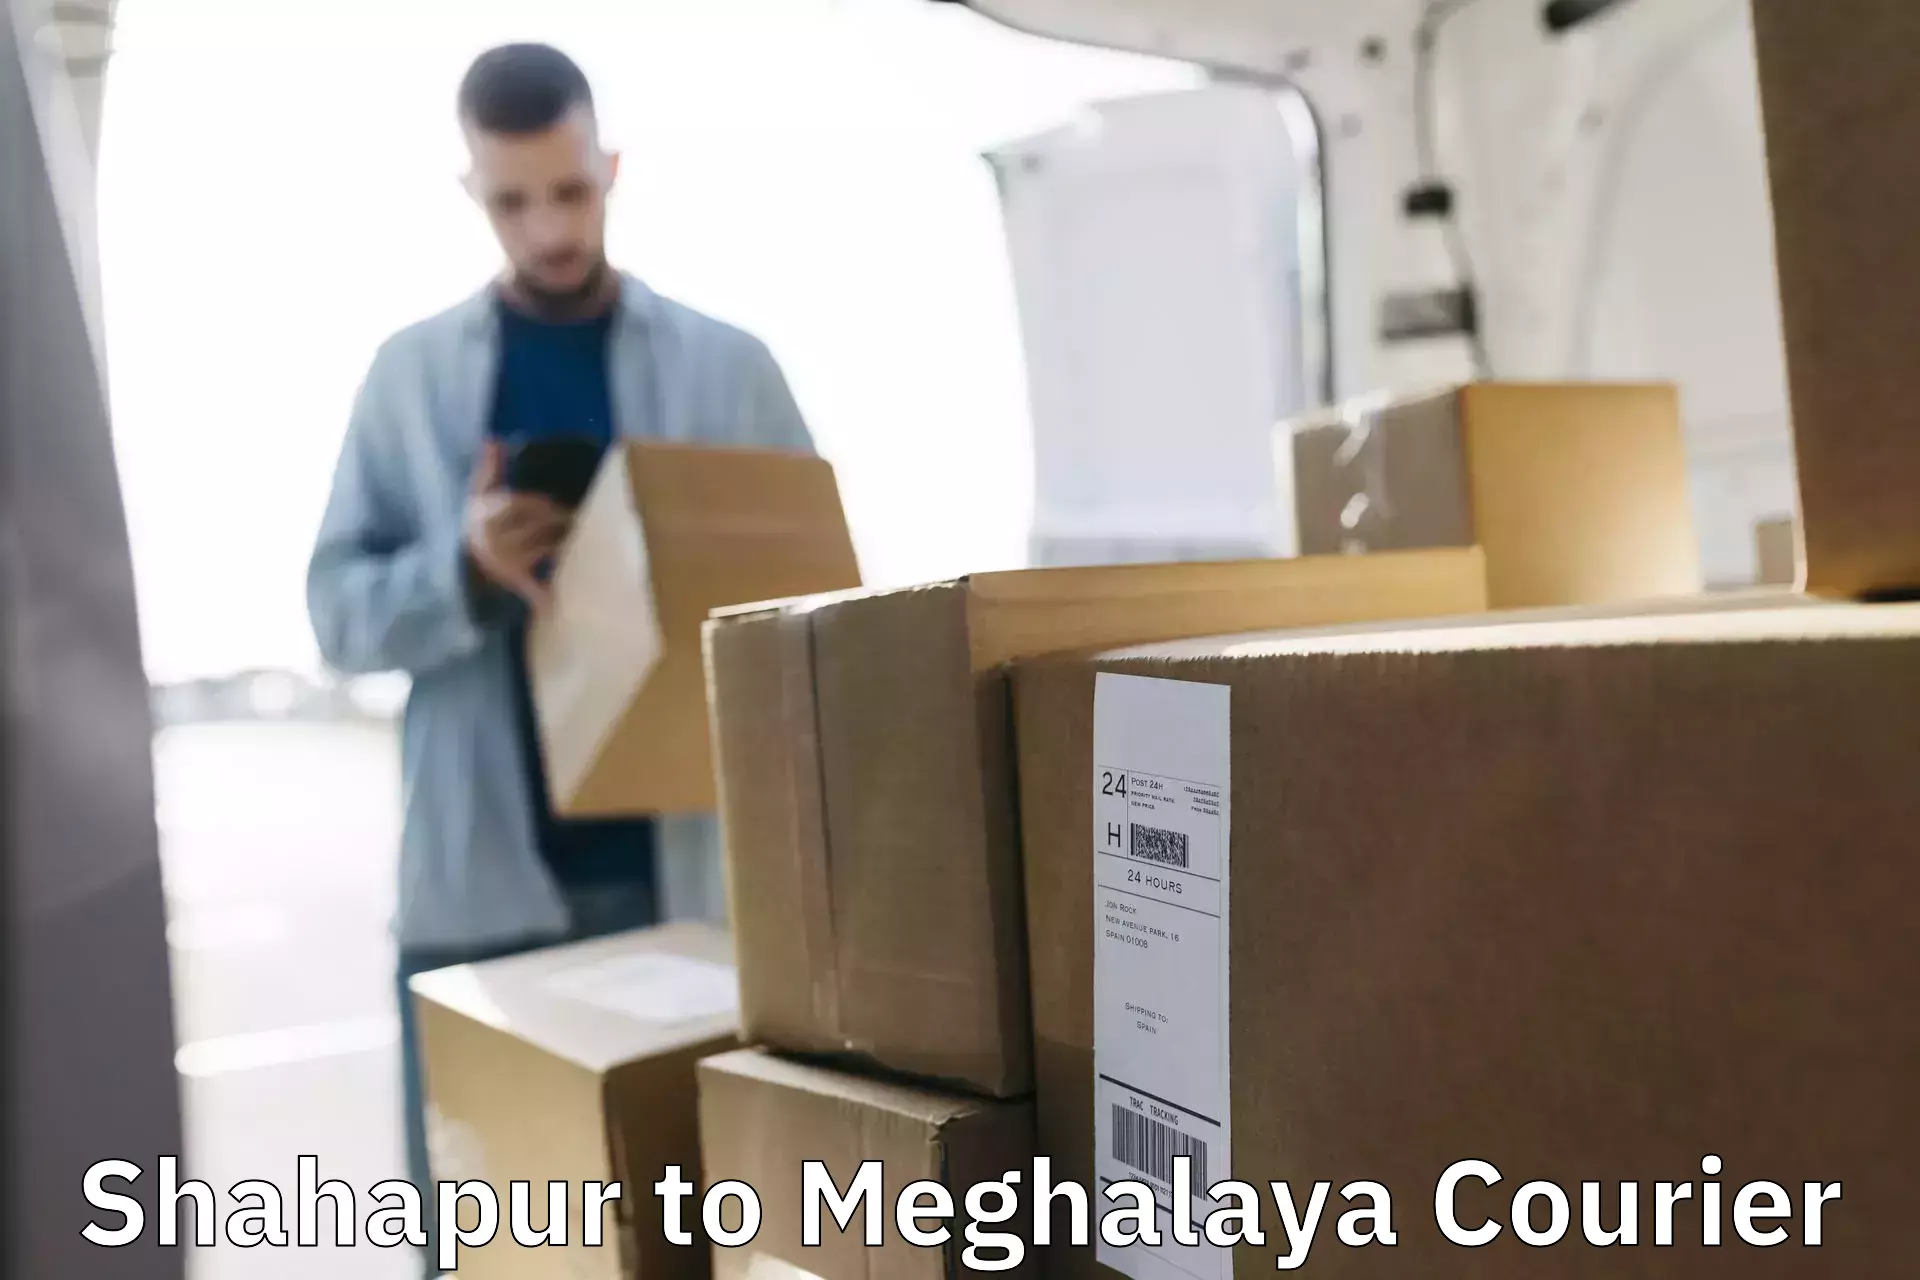 Specialized shipment handling Shahapur to Shillong